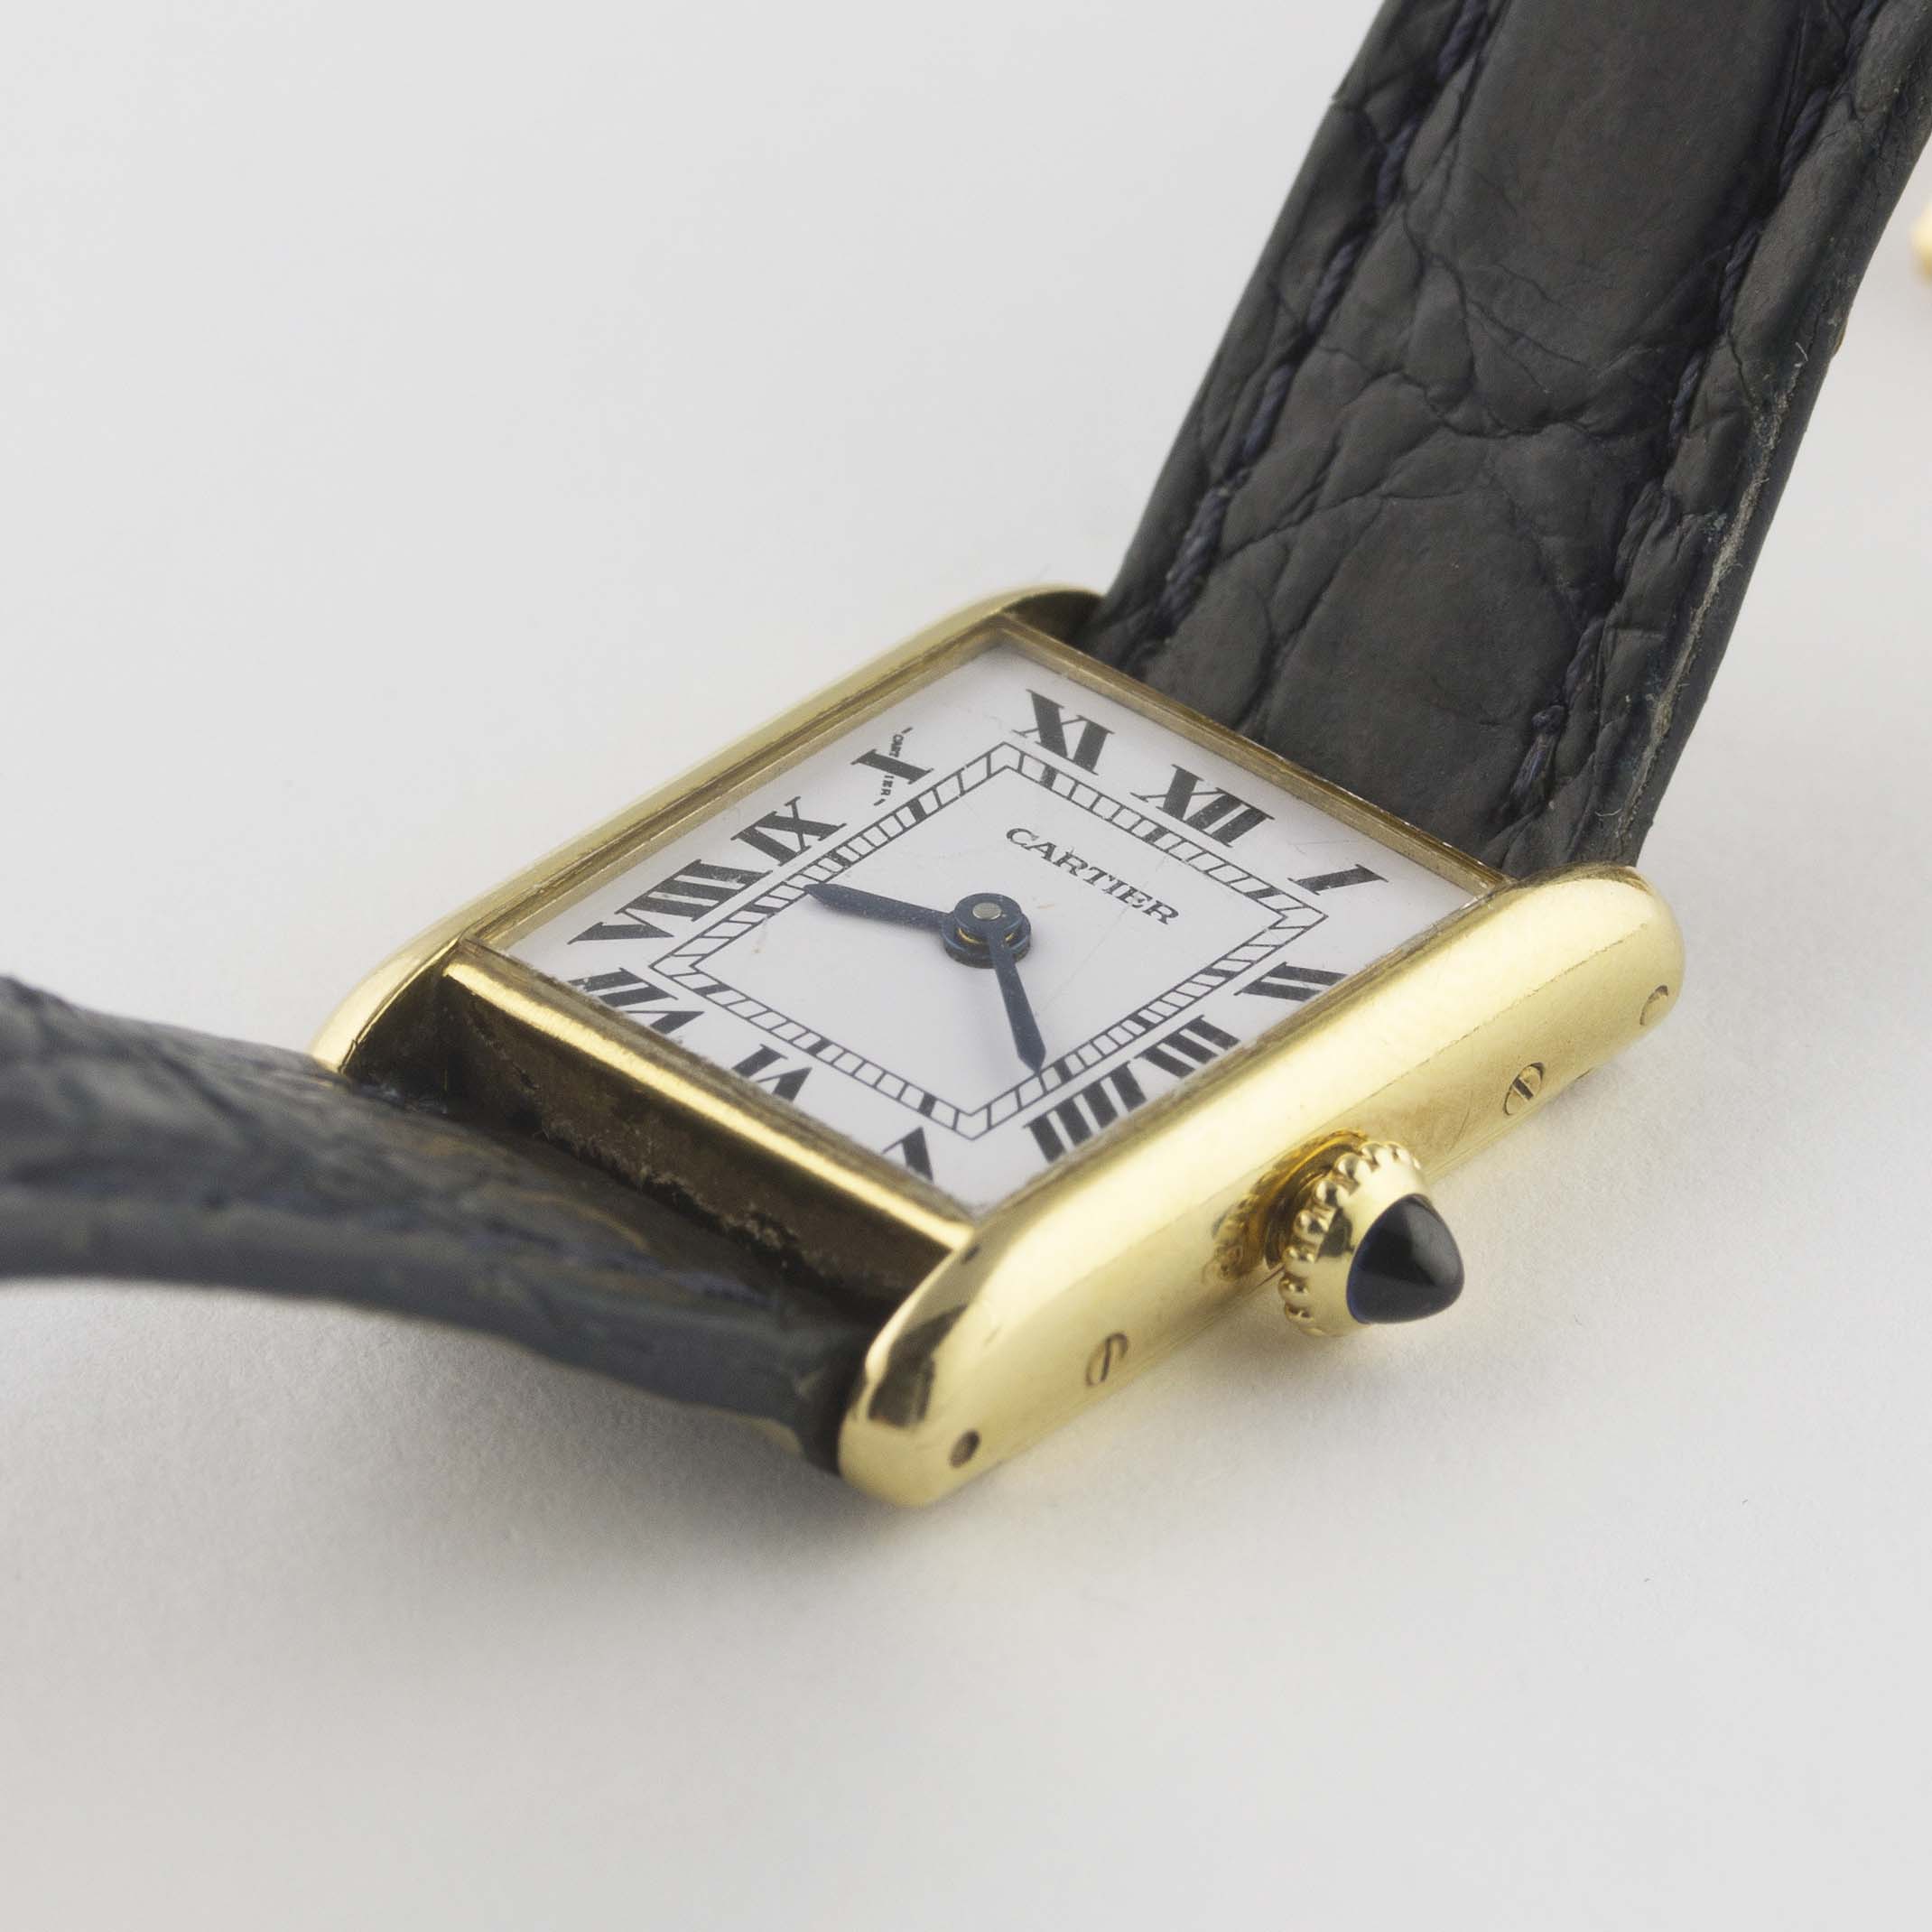 A LADIES 18K SOLID GOLD CARTIER TANK WRIST WATCH CIRCA 1980s Movement: Manual wind, signed - Image 3 of 12